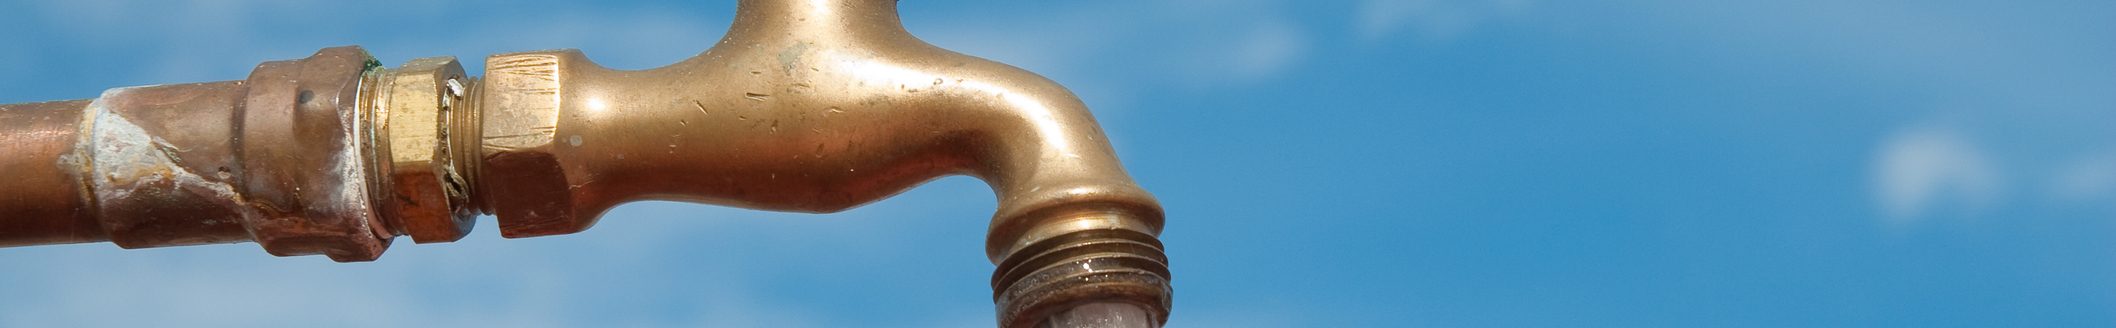 Image of a faucet spouting water (Photo: iStock - REKINC1980)